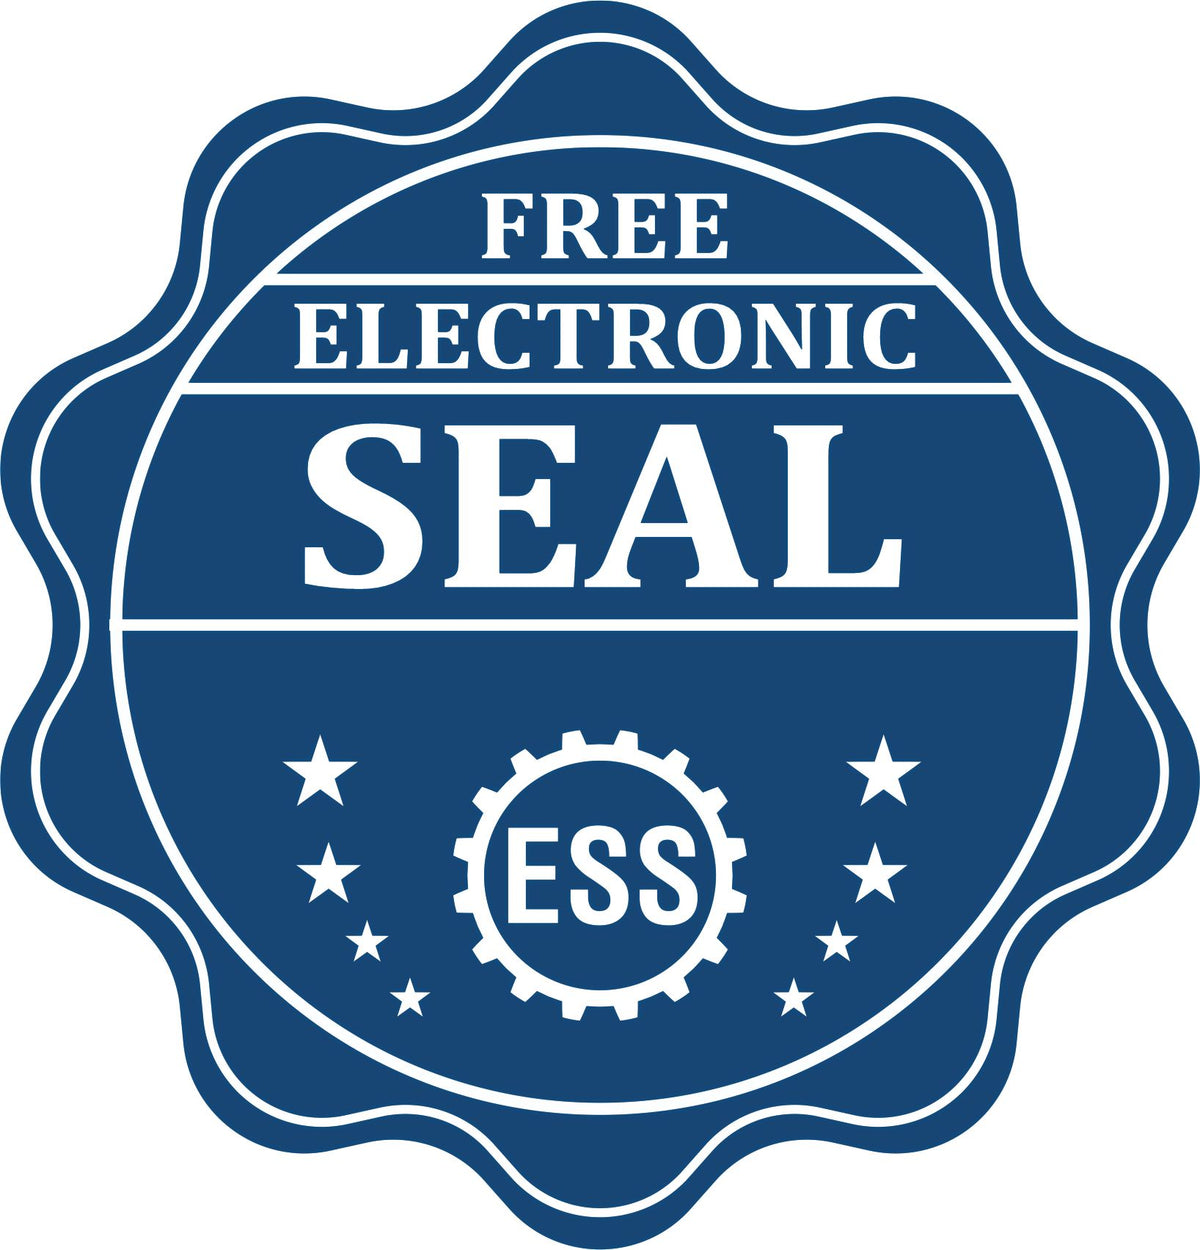 A badge showing a free electronic seal for the Heavy Duty Cast Iron Mississippi Geologist Seal Embosser with stars and the ESS gear on the emblem.